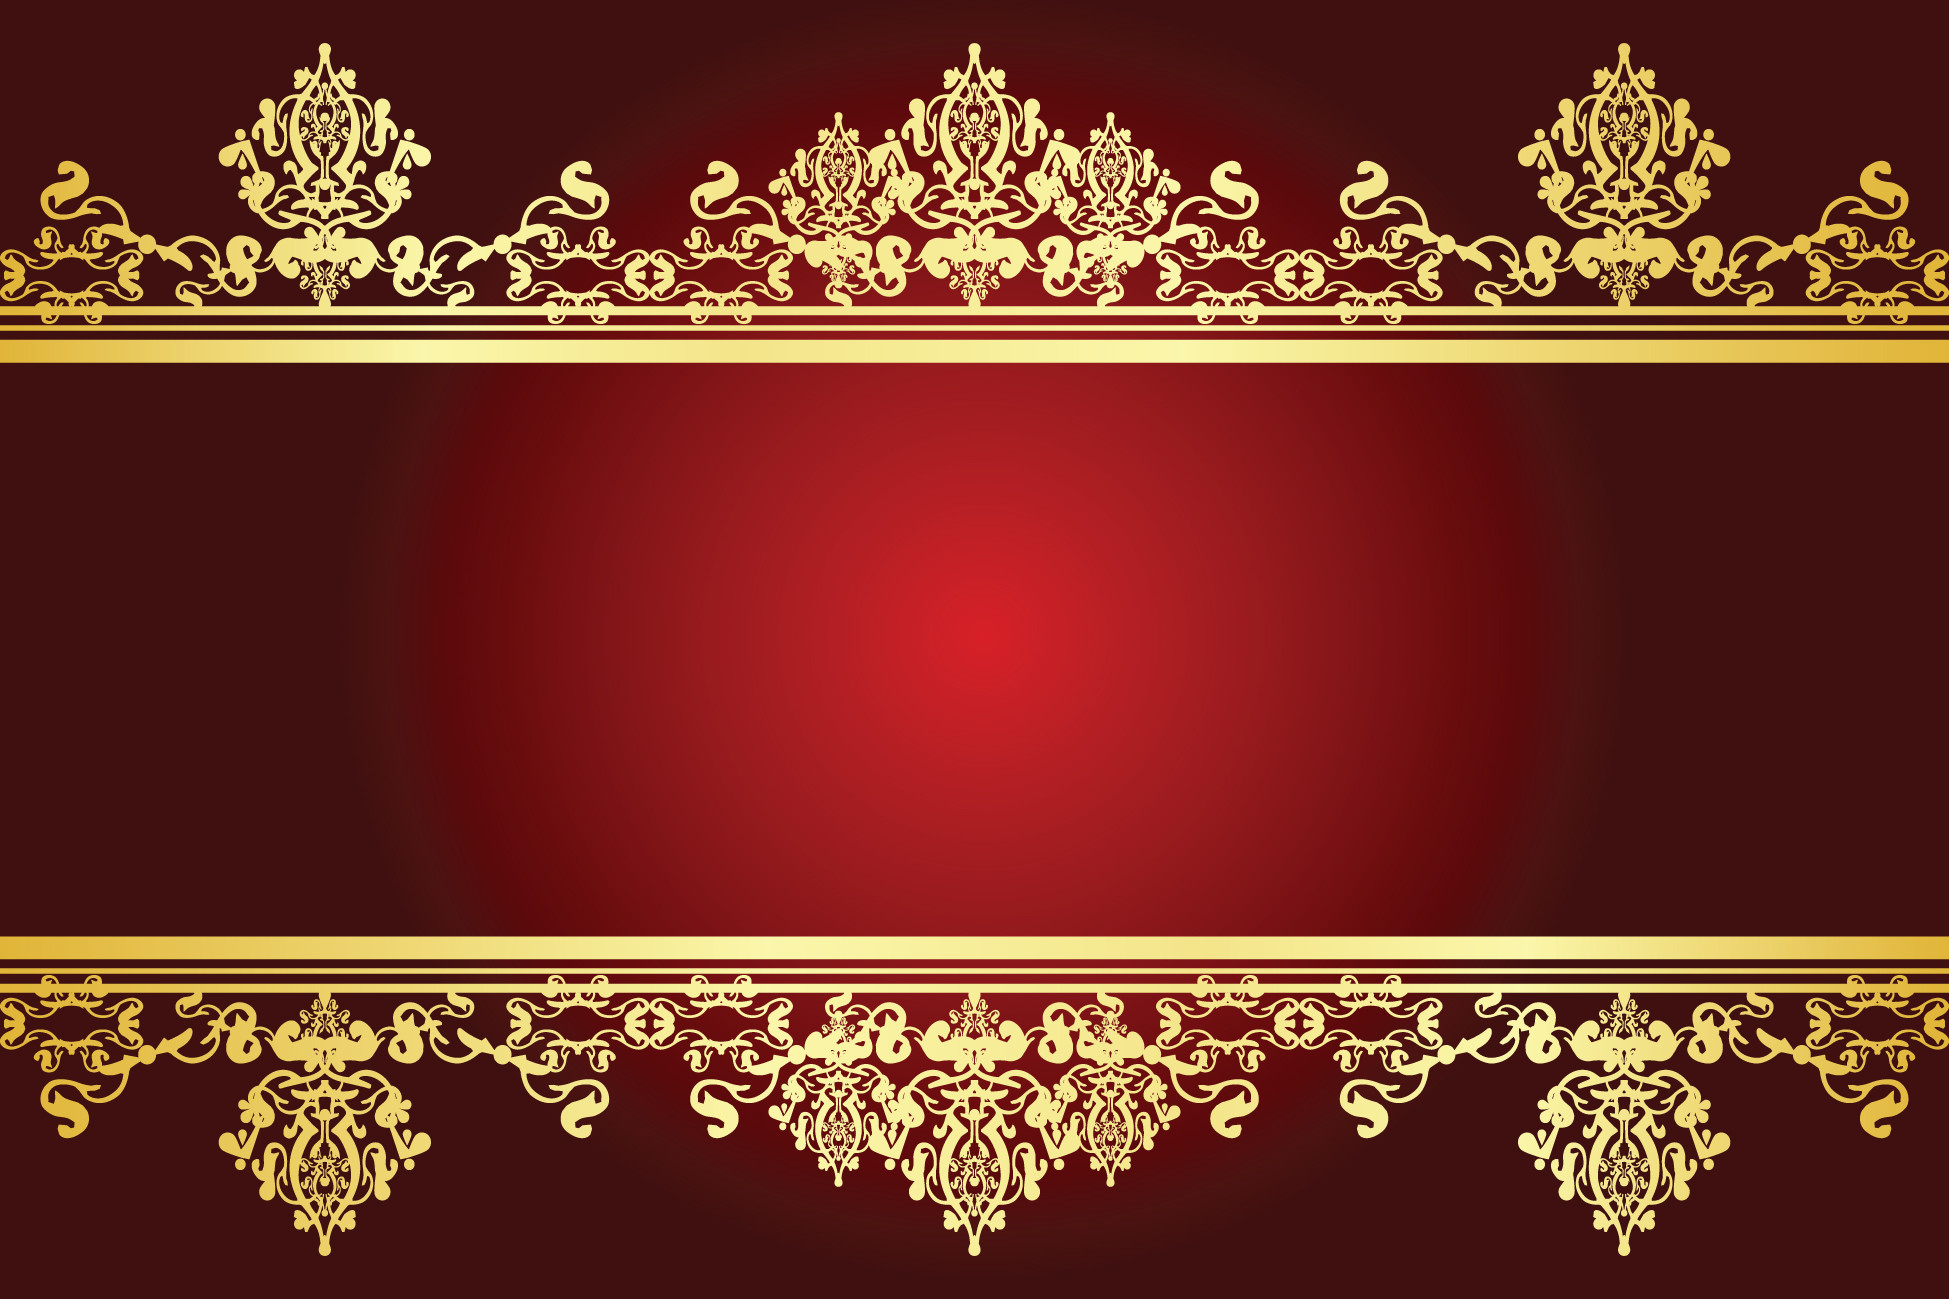 1949x1299 red and gold wallpaper Red And Gold Backgrounds Pictures to Pin on  Pinterest - PinsDaddy